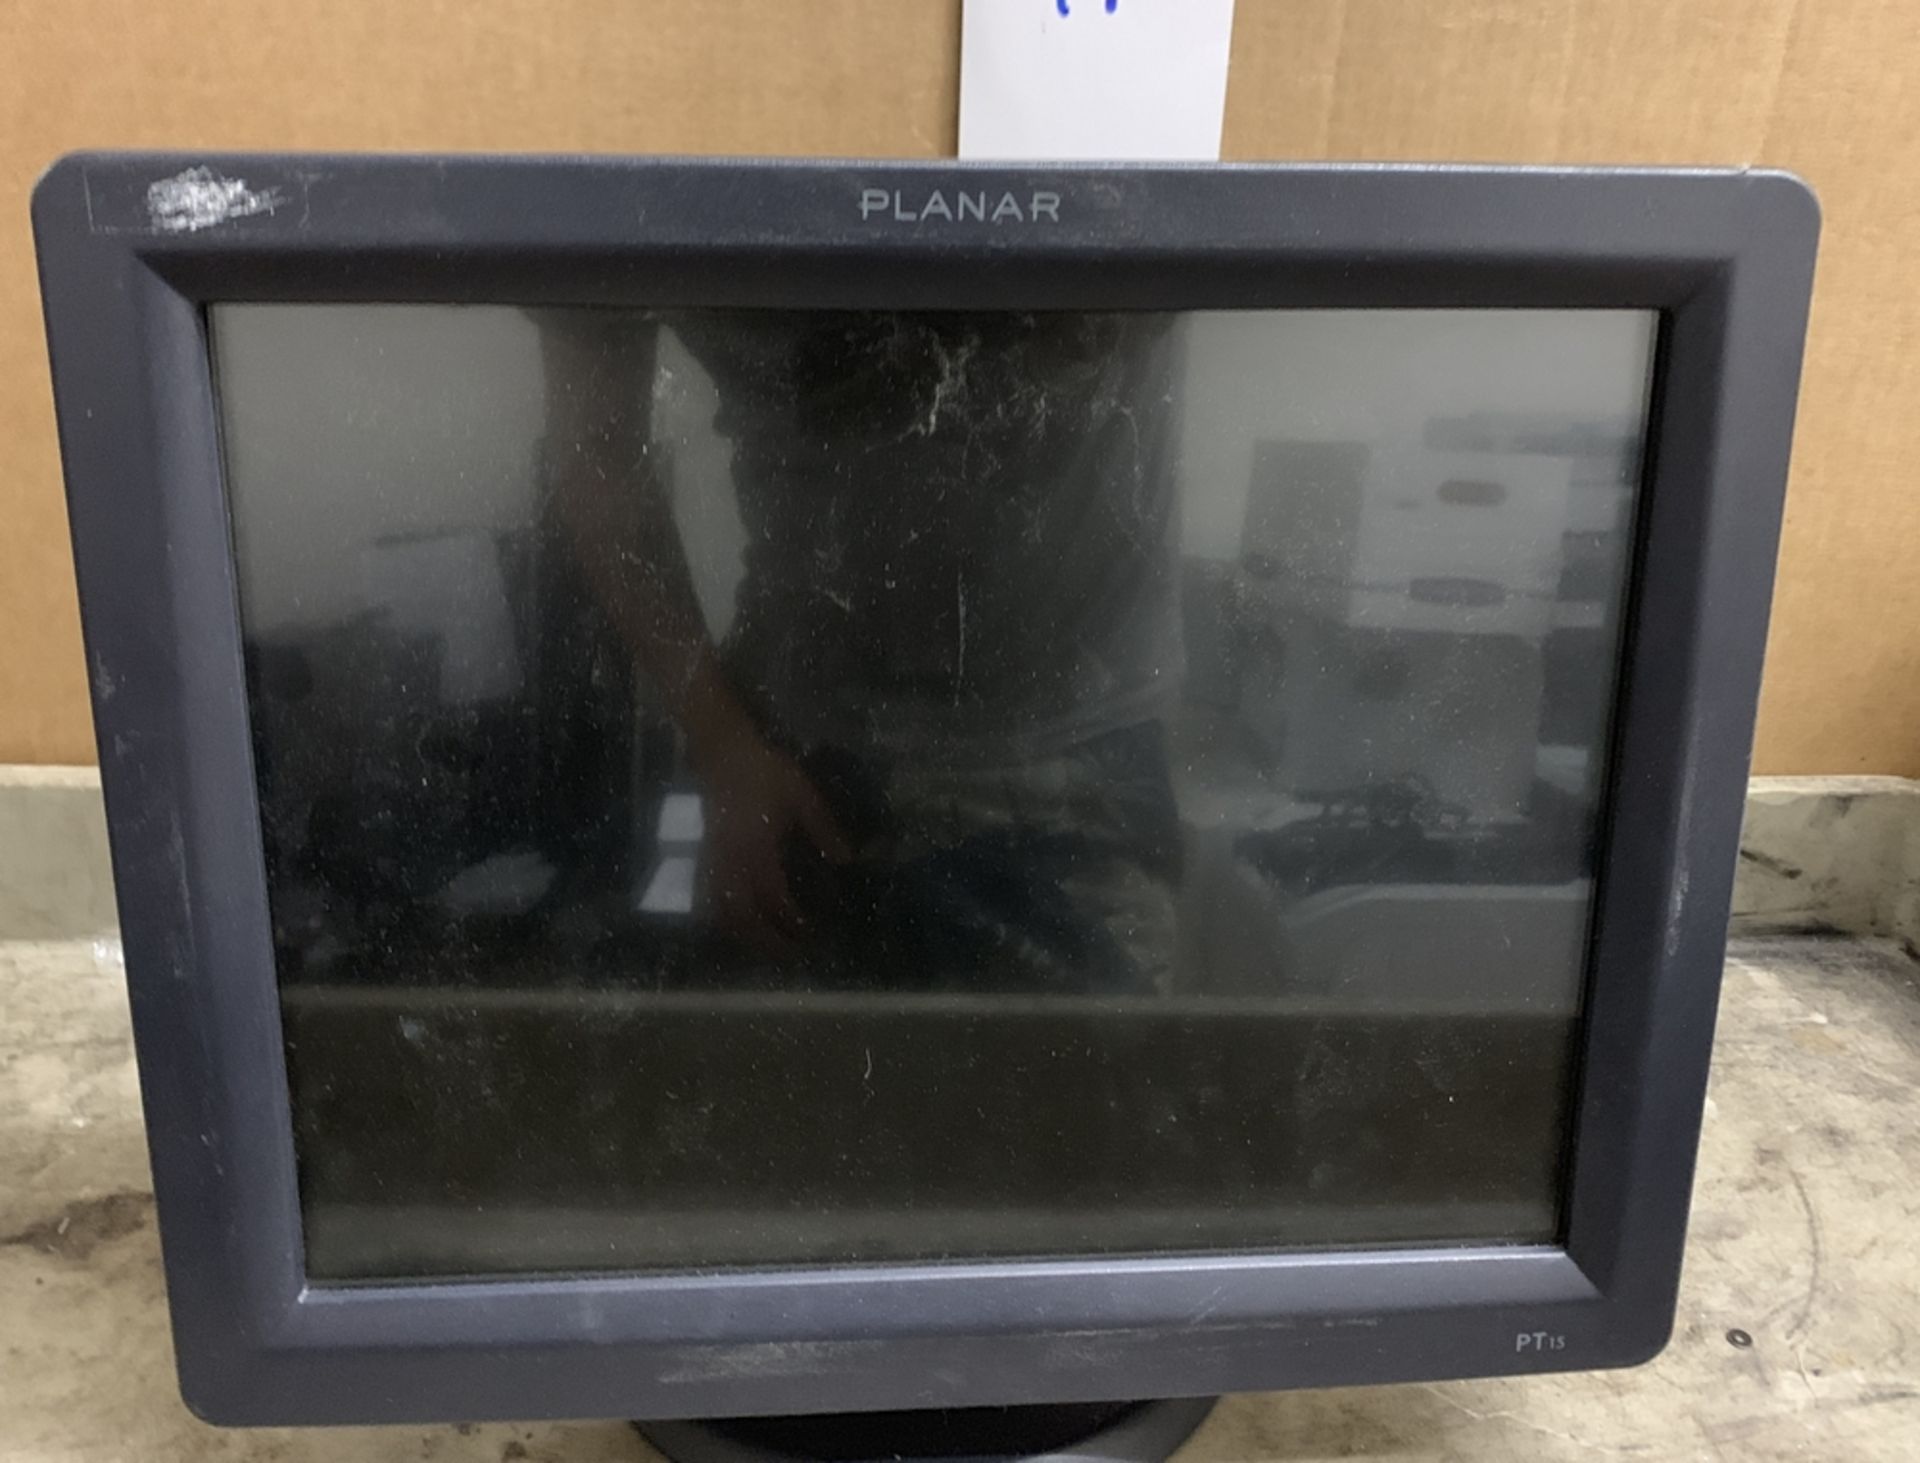 4 X Planar PT1575S-BK 15" LCD Monitor $400 A SCREEN USED ON EBAY THESE ARE WORTH $2000 AS USED ITEMS - Image 2 of 3